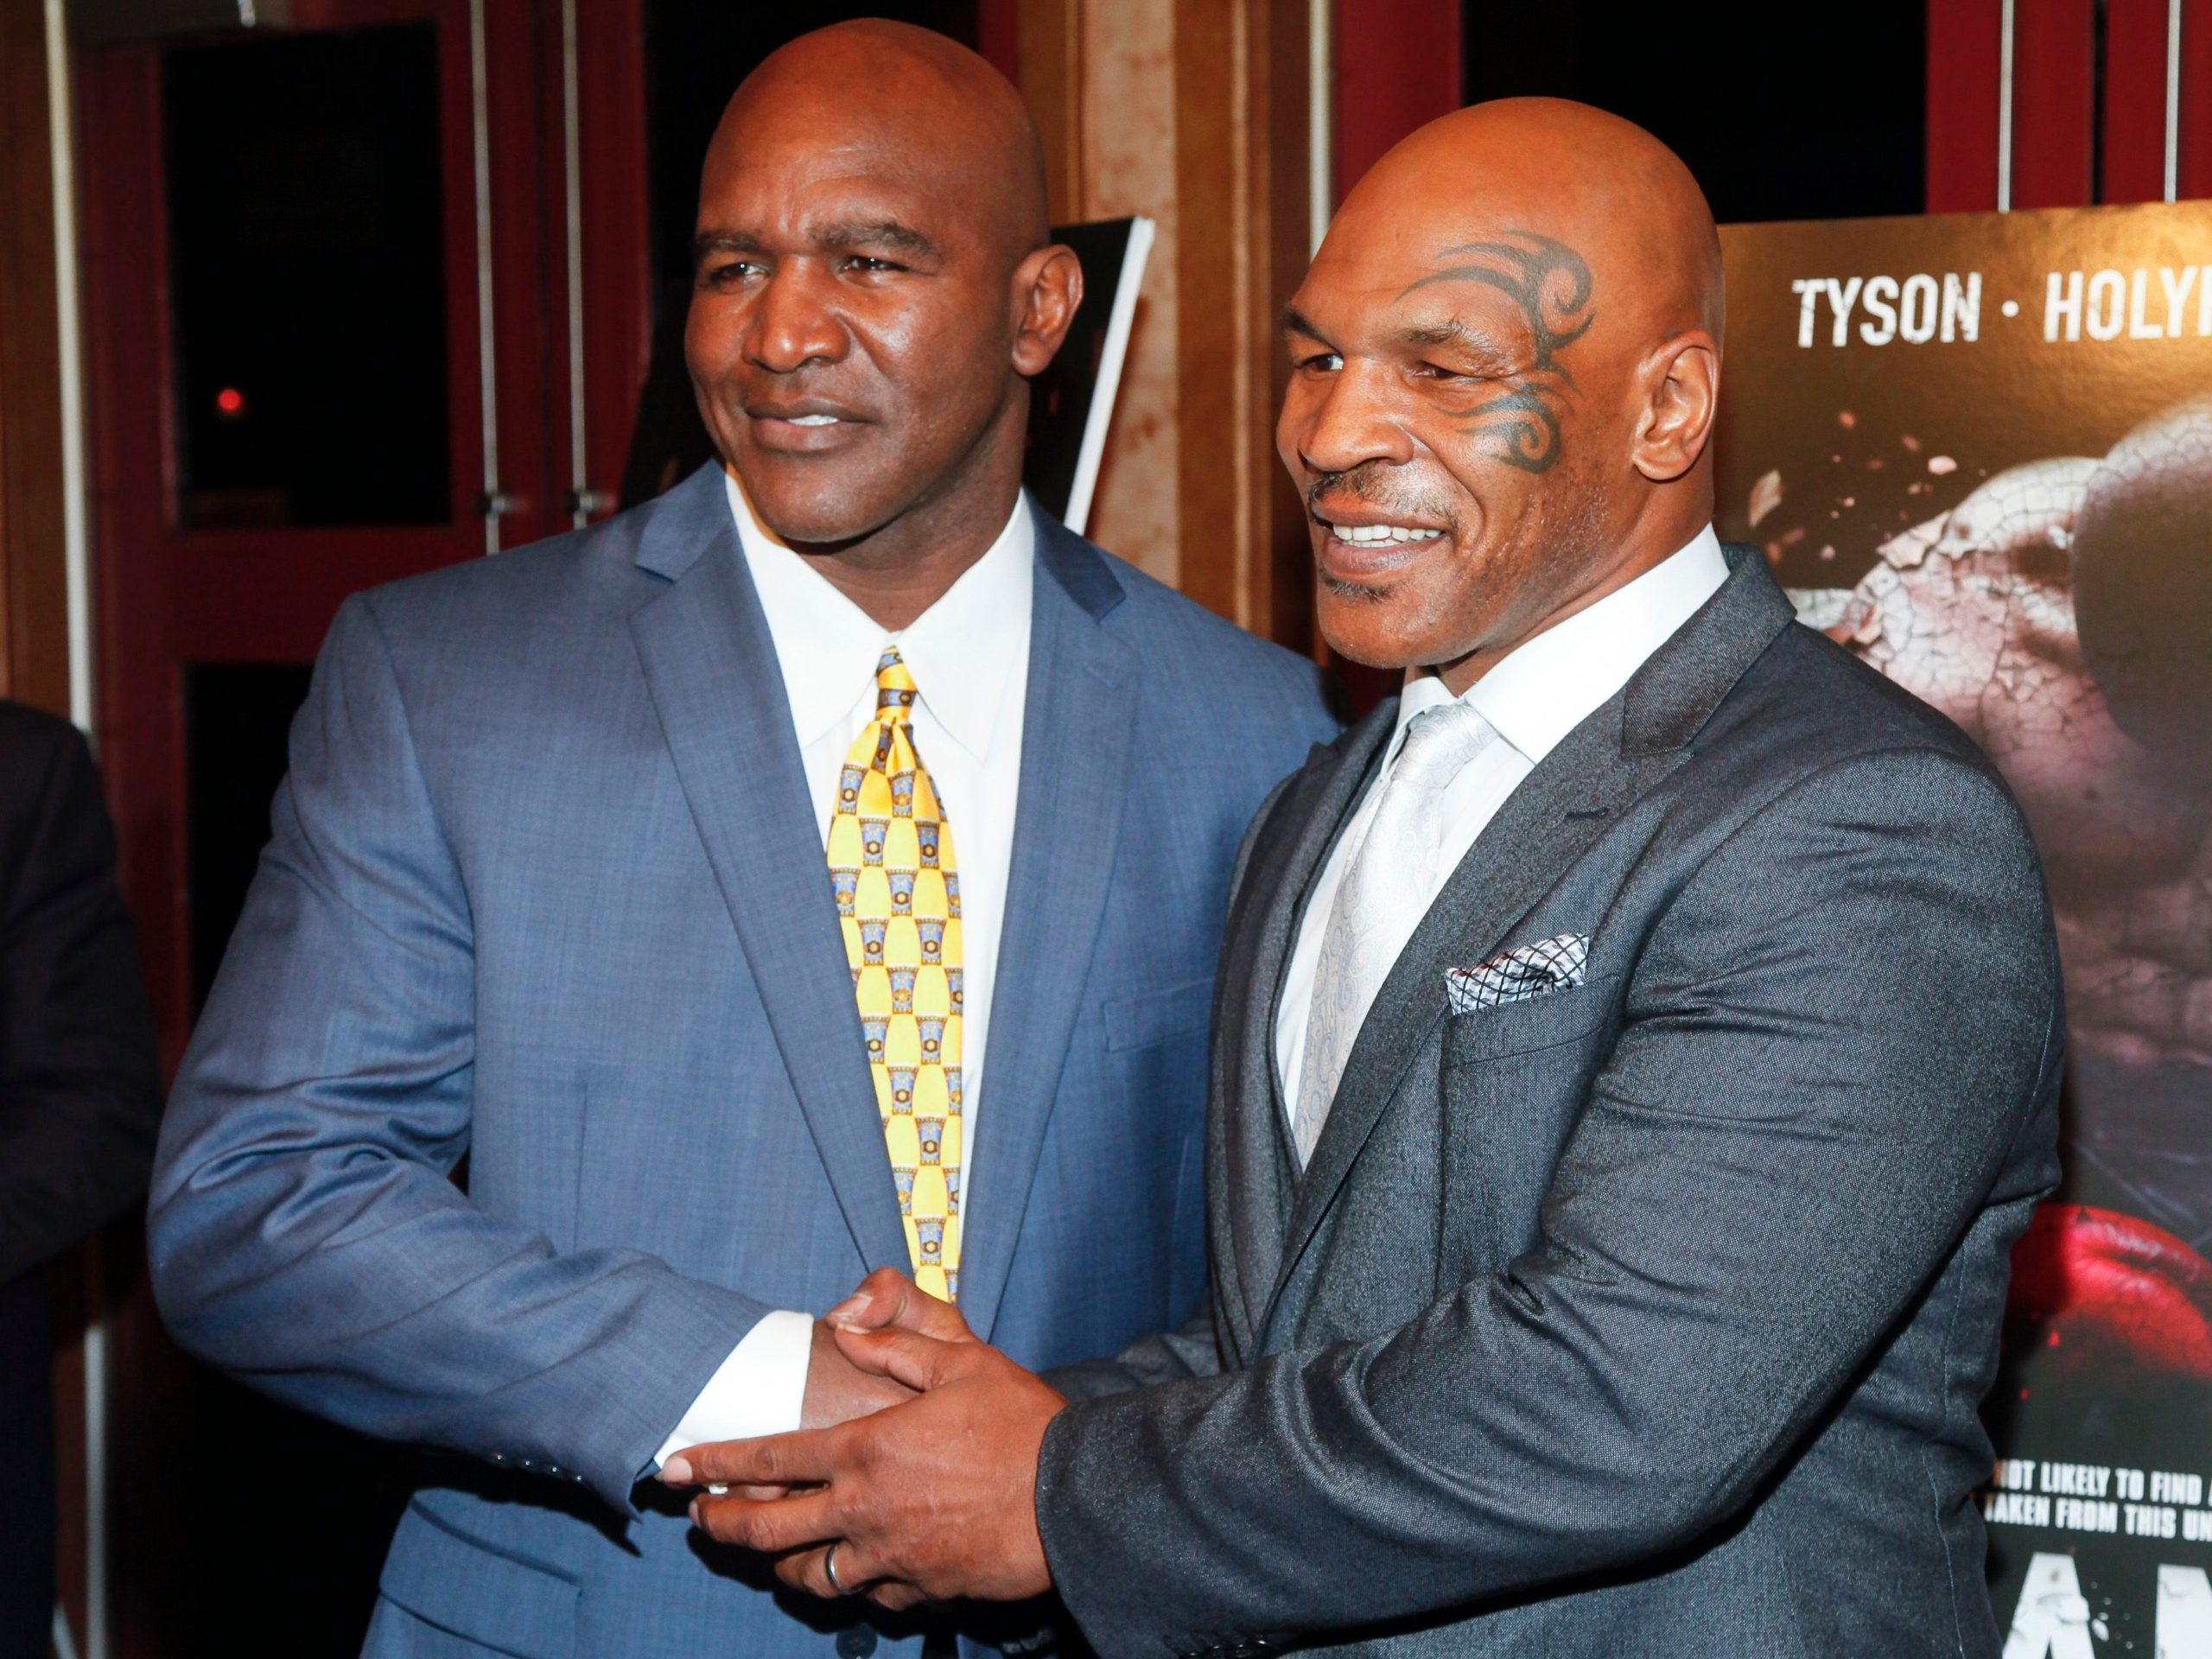 Mike Tyson Says a Charitable Rematch With Evander Holyfield 'Would be Awesome'